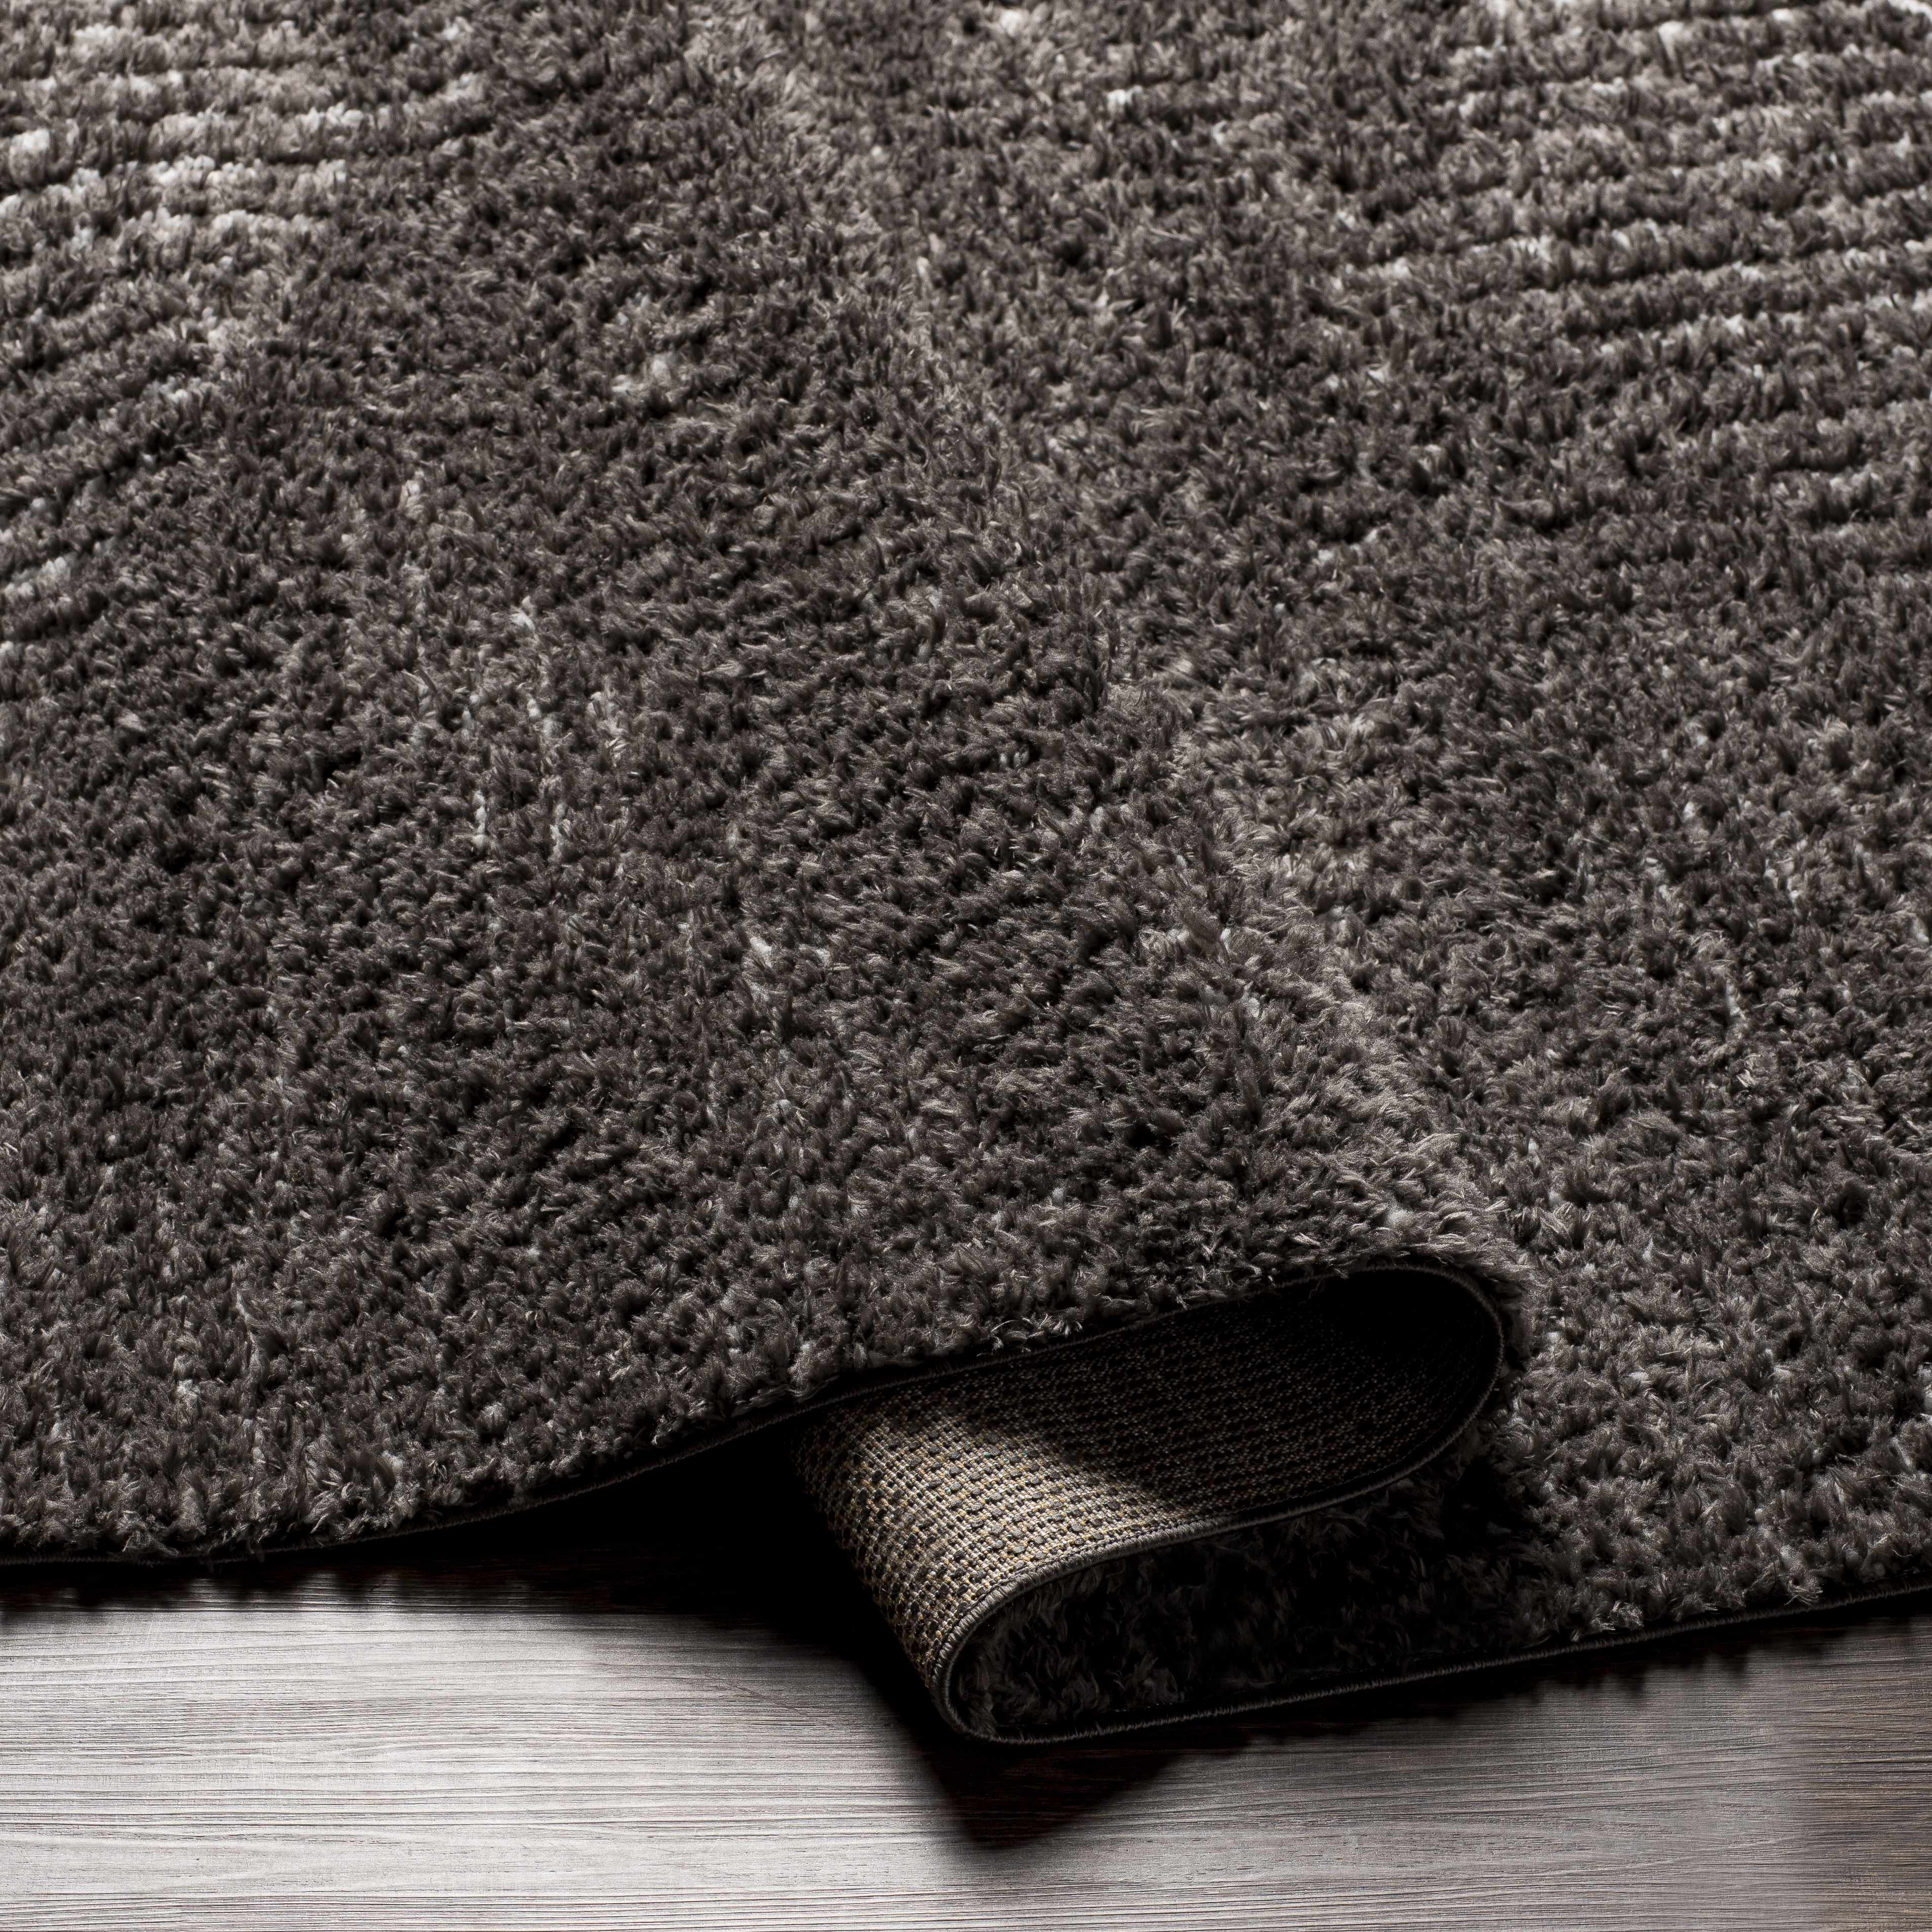 Claver Charcoal Runner Rug